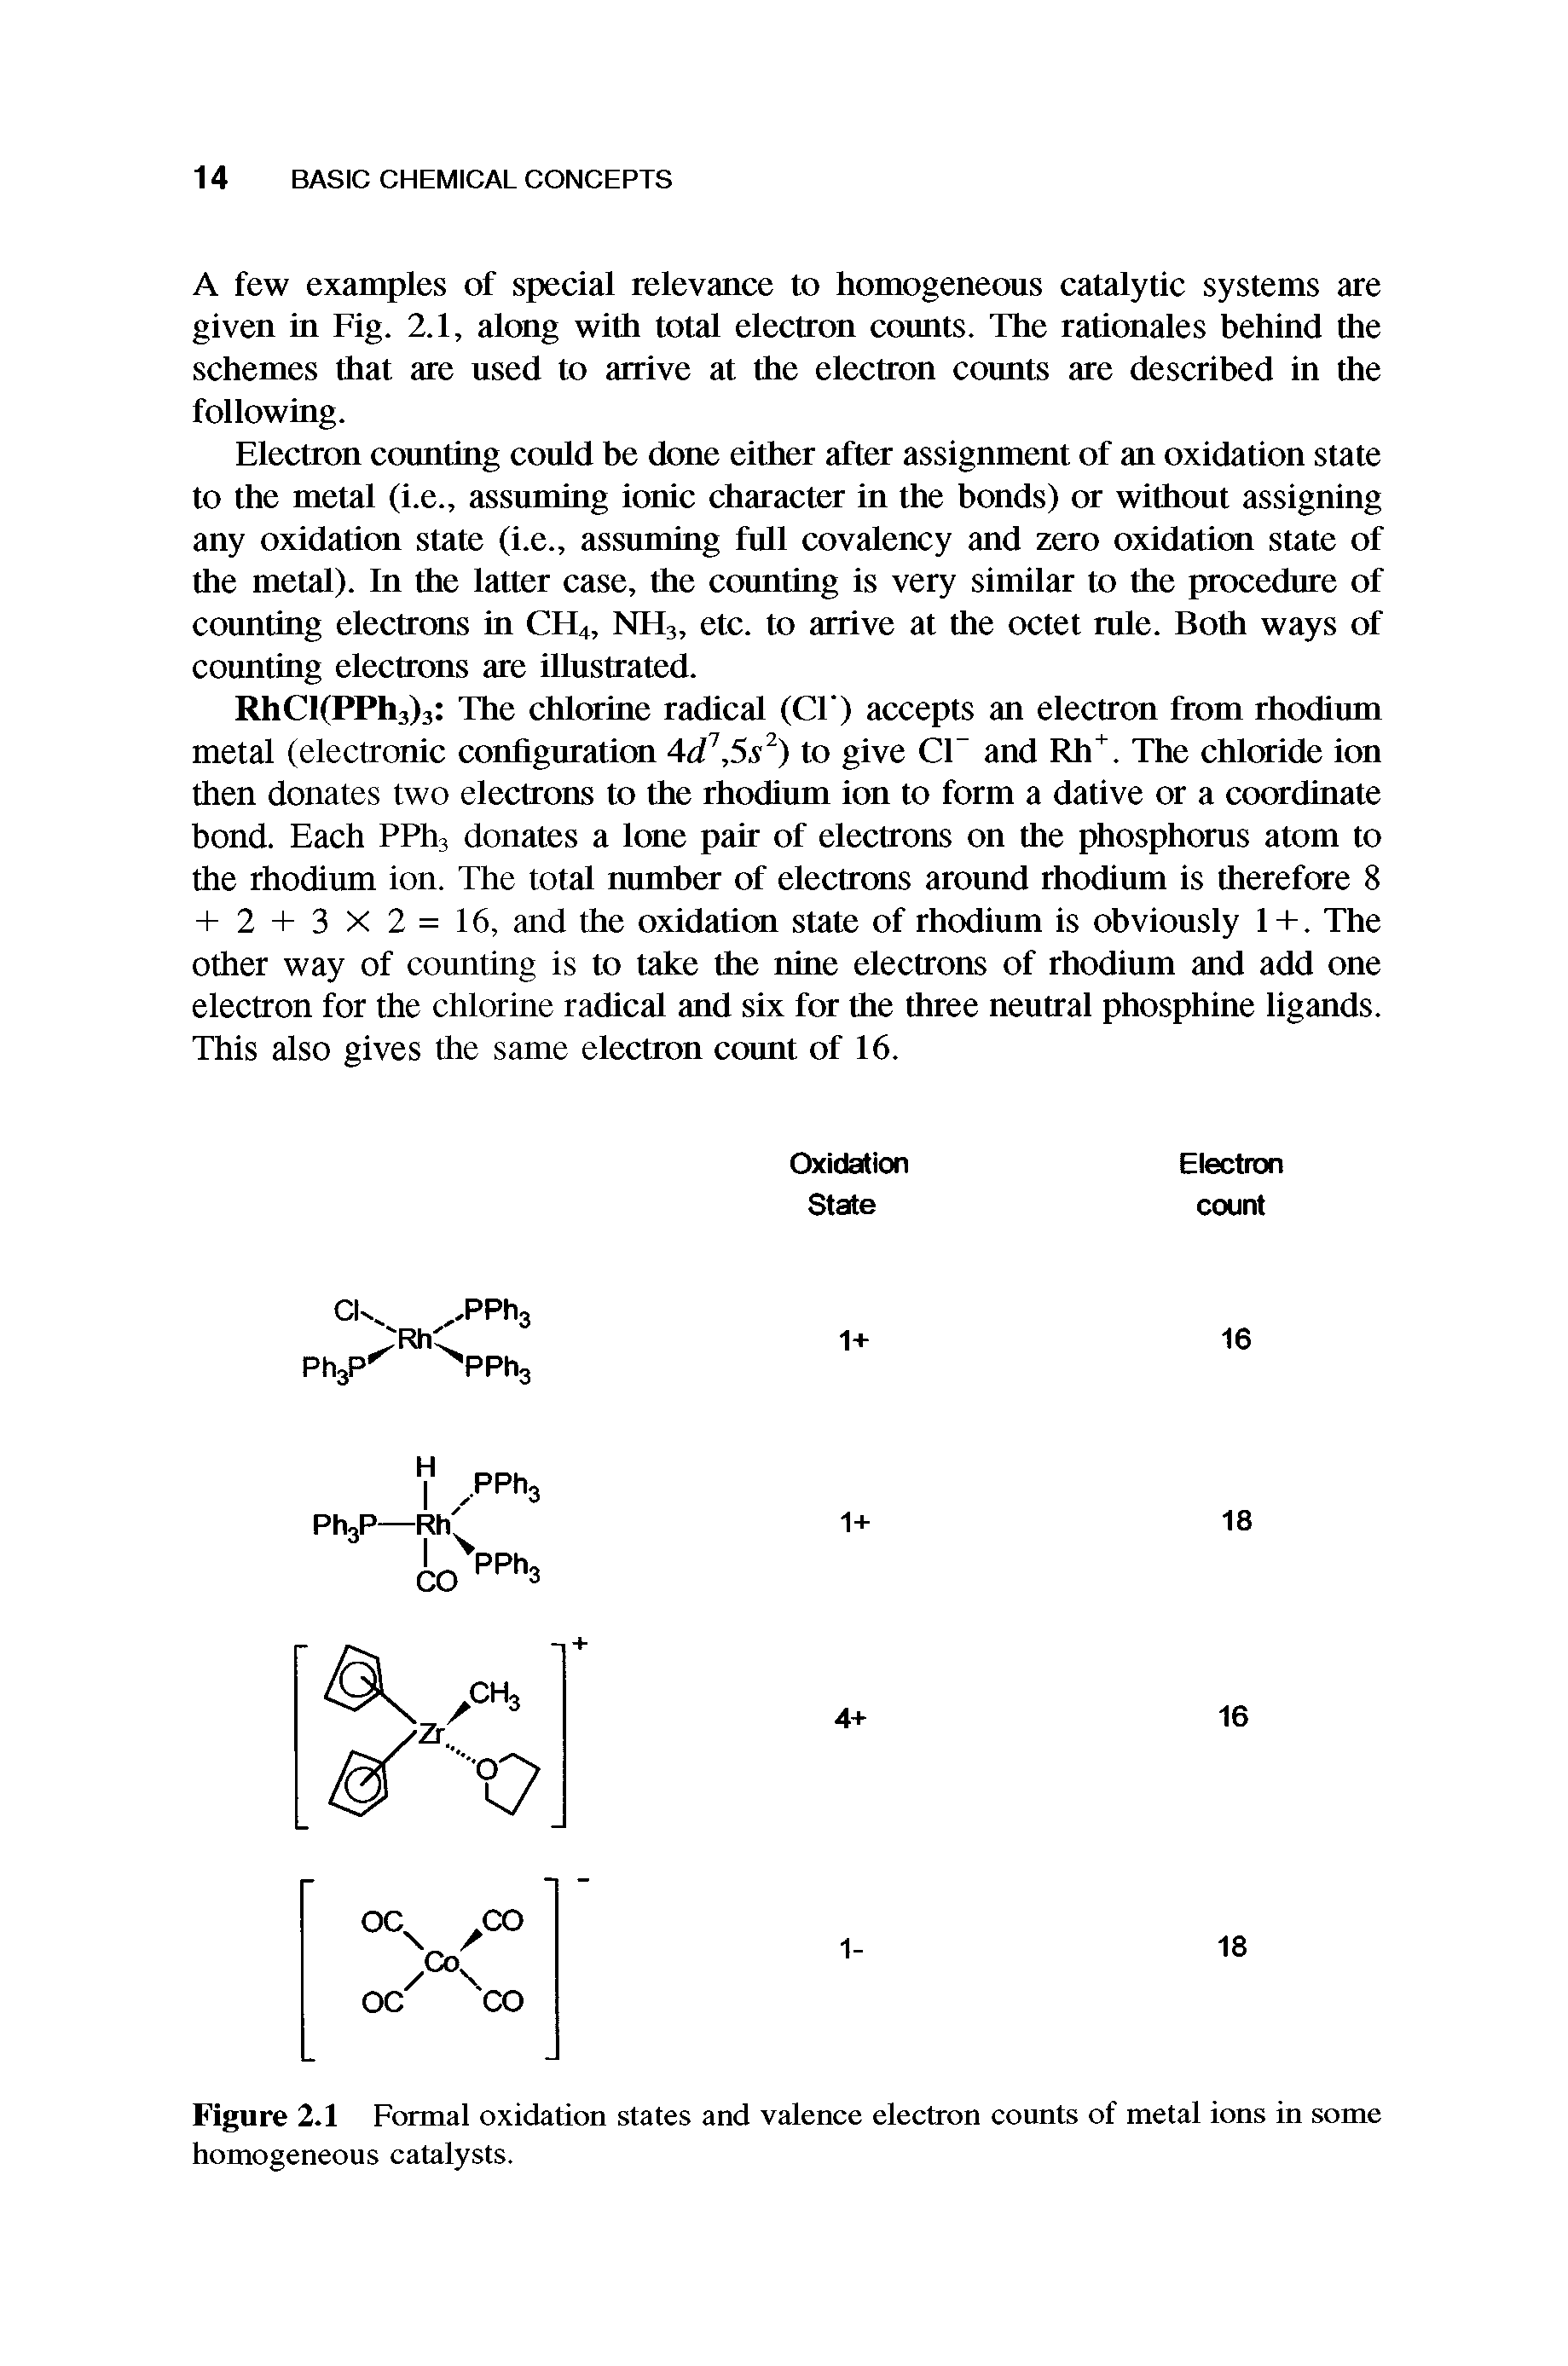 Figure 2.1 Formal oxidation states and valence electron counts of metal ions in some homogeneous catalysts.